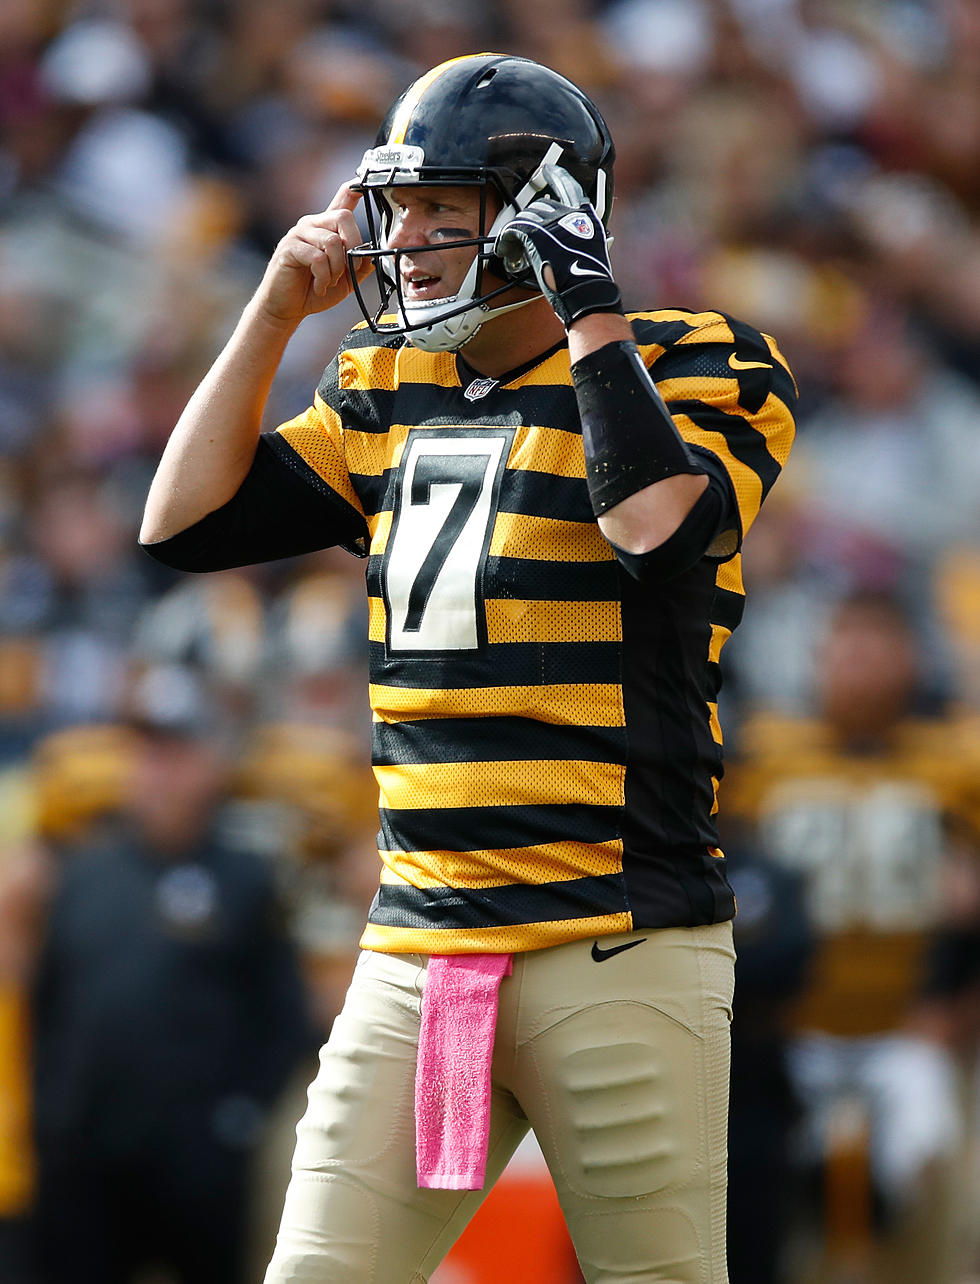 The Absolute Worst Uniforms in NFL History [GALLERY]